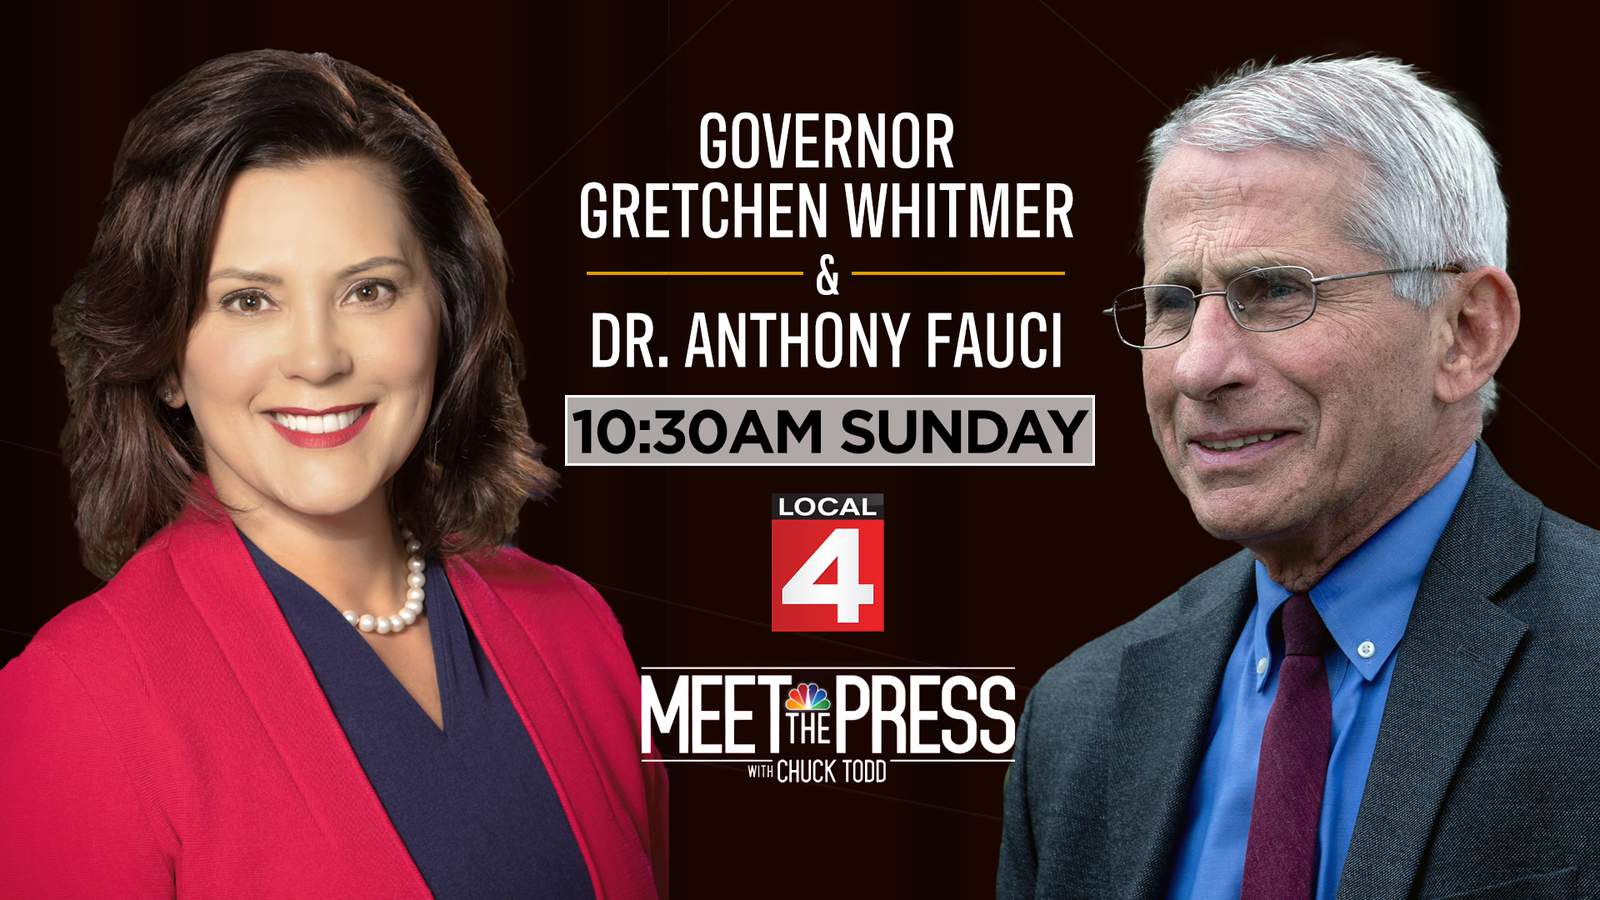 Michigan governor to appear on Meet the Press with Dr. Anthony Fauci as state’s COVID cases continue surging